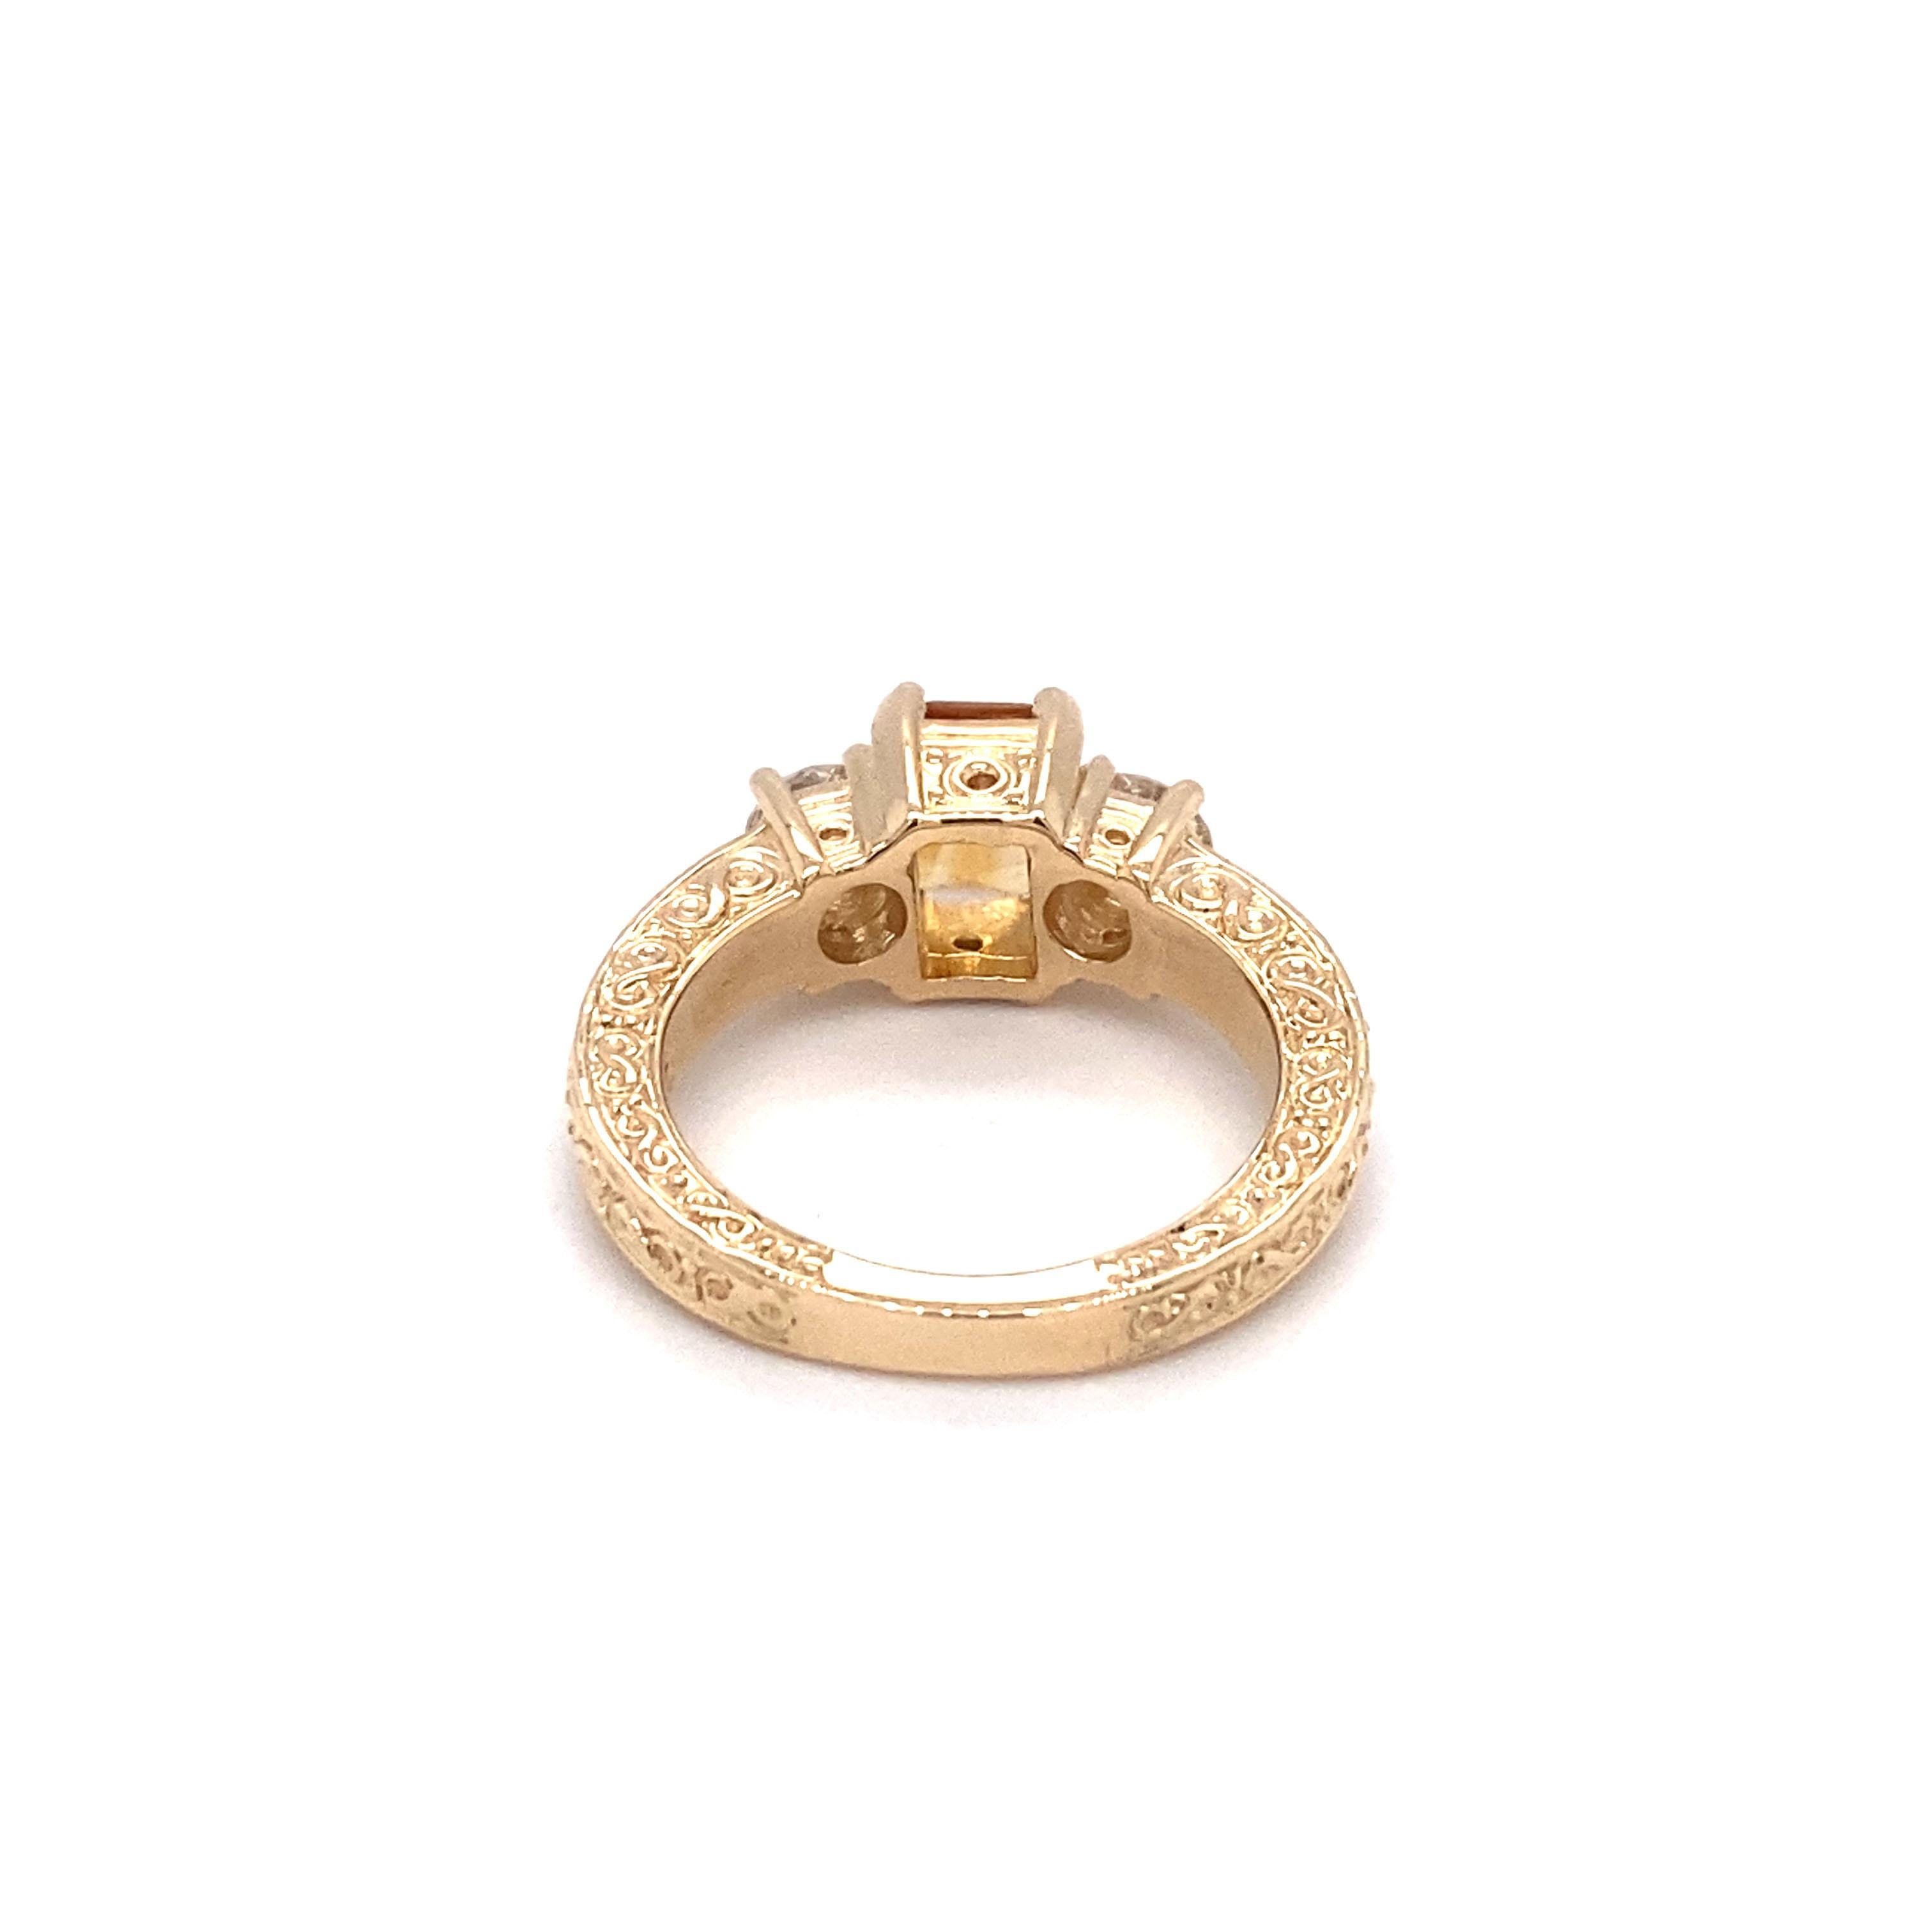 Circa: 1990s
Metal Type: 14k Gold
Size: US 6.25
Weight: 7.2g

Diamond Details:

Cut: Round brilliant
Carat: 0.60 carat total weight
Color: G-H
Clarity: VS-SI